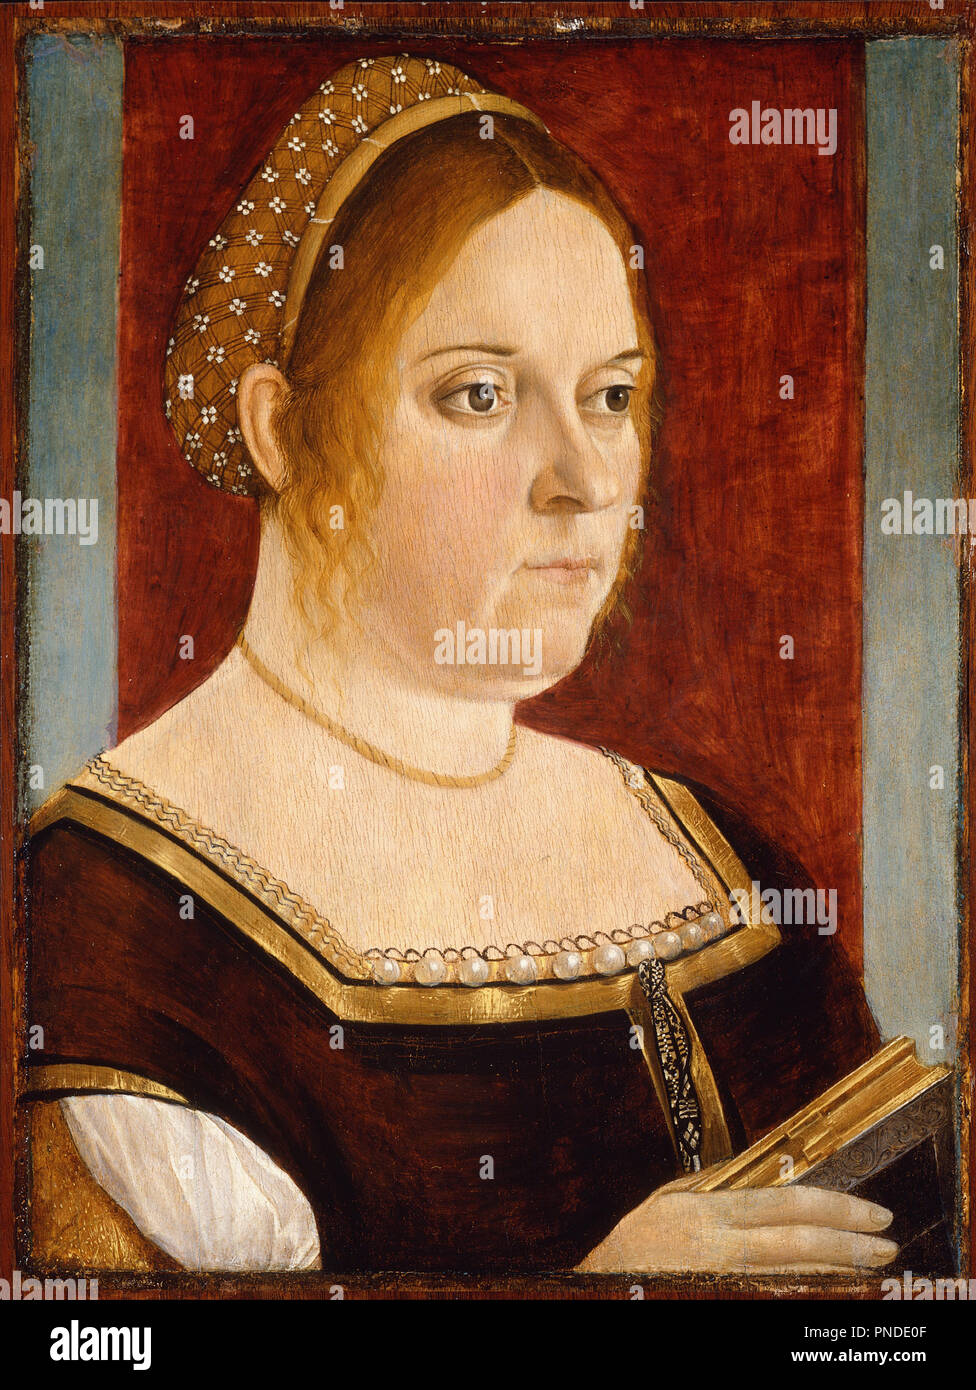 Portrait of a Lady with a Book. Date/Period: Ca. 1495. Painting. Oil on lime. Height: 39.3 cm (15.5 in); Width: 28.8 cm (11.3 in). Author: Vittore Carpaccio. Stock Photo